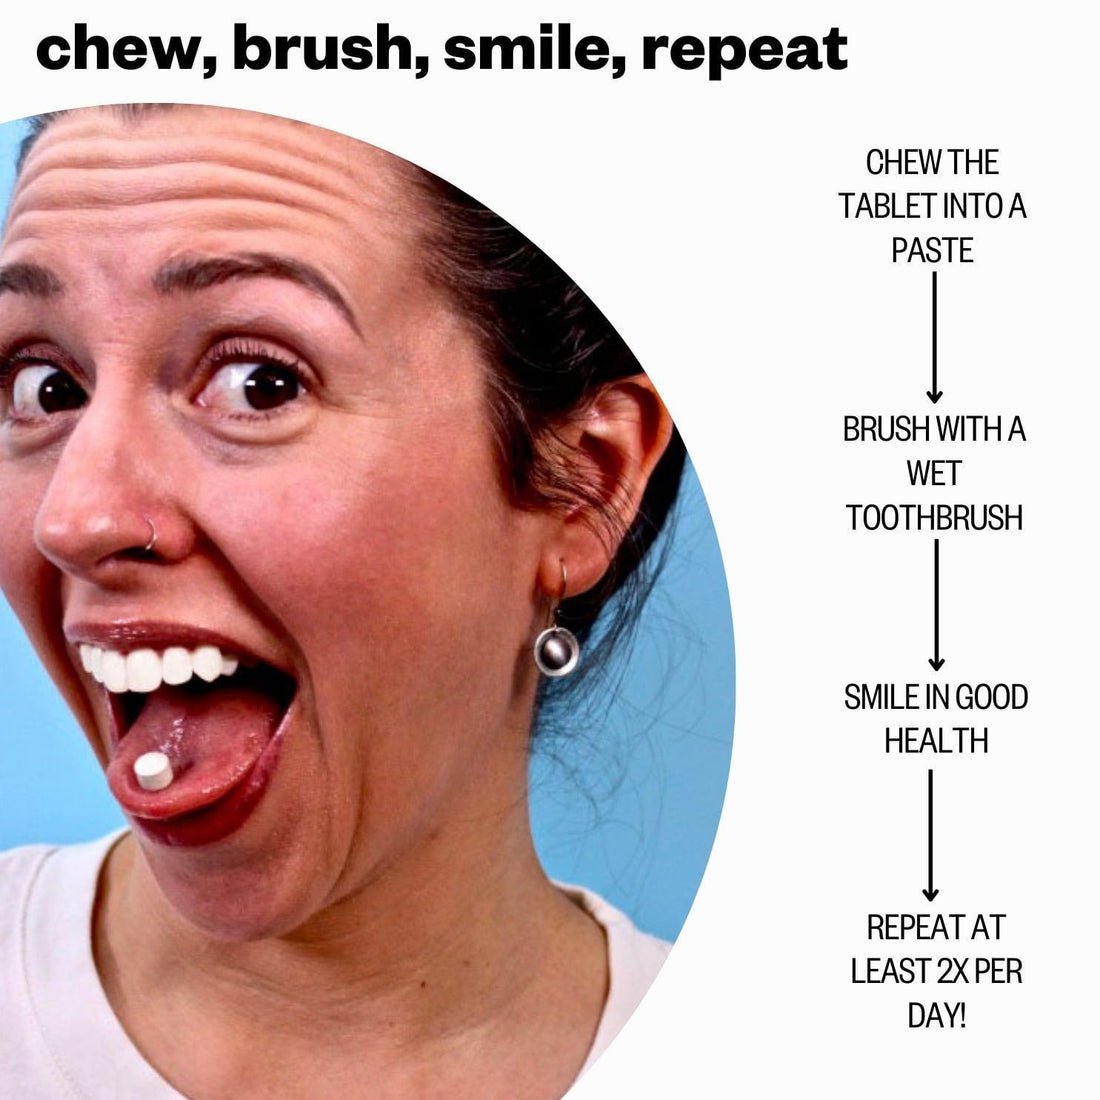 Infographic for etee minty vanilla fluoride chewpaste infographic with the heading "chew, brush, smile, repeat" and the instructions: "chew the tablet into a paste, brush with a wet toothbrush, smile in good health, repeat at least 2x per day"